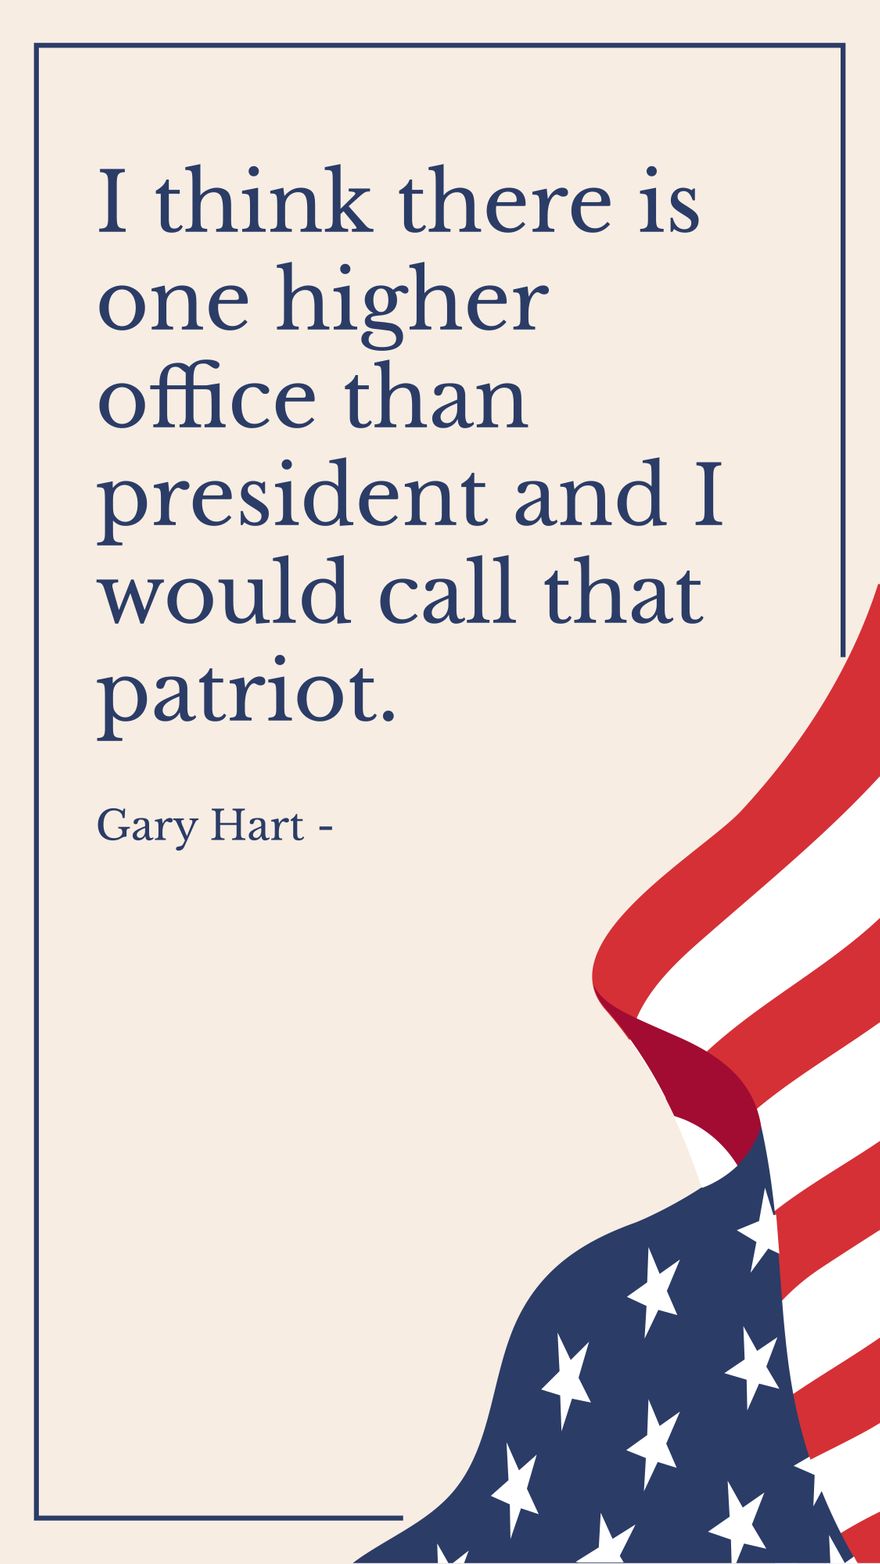 Gary Hart - I think there is one higher office than president and I would call that patriot.